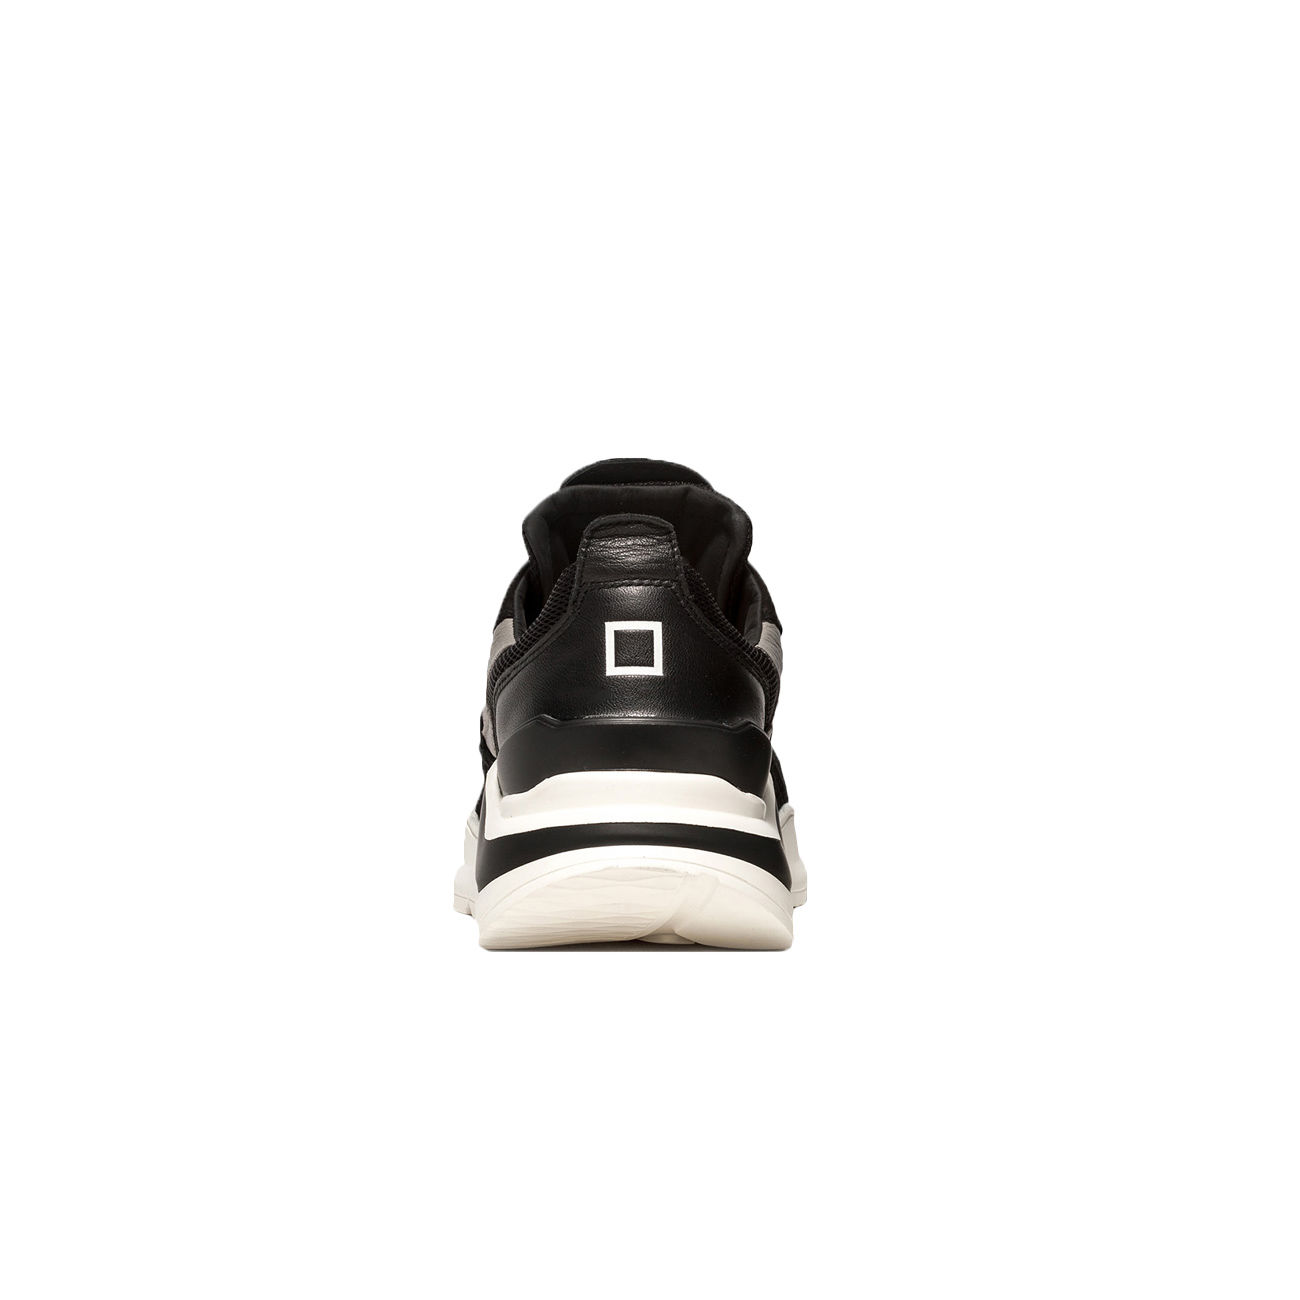 FUGA MESH SNEAKER WITH LEATHER INSERTS Man Black